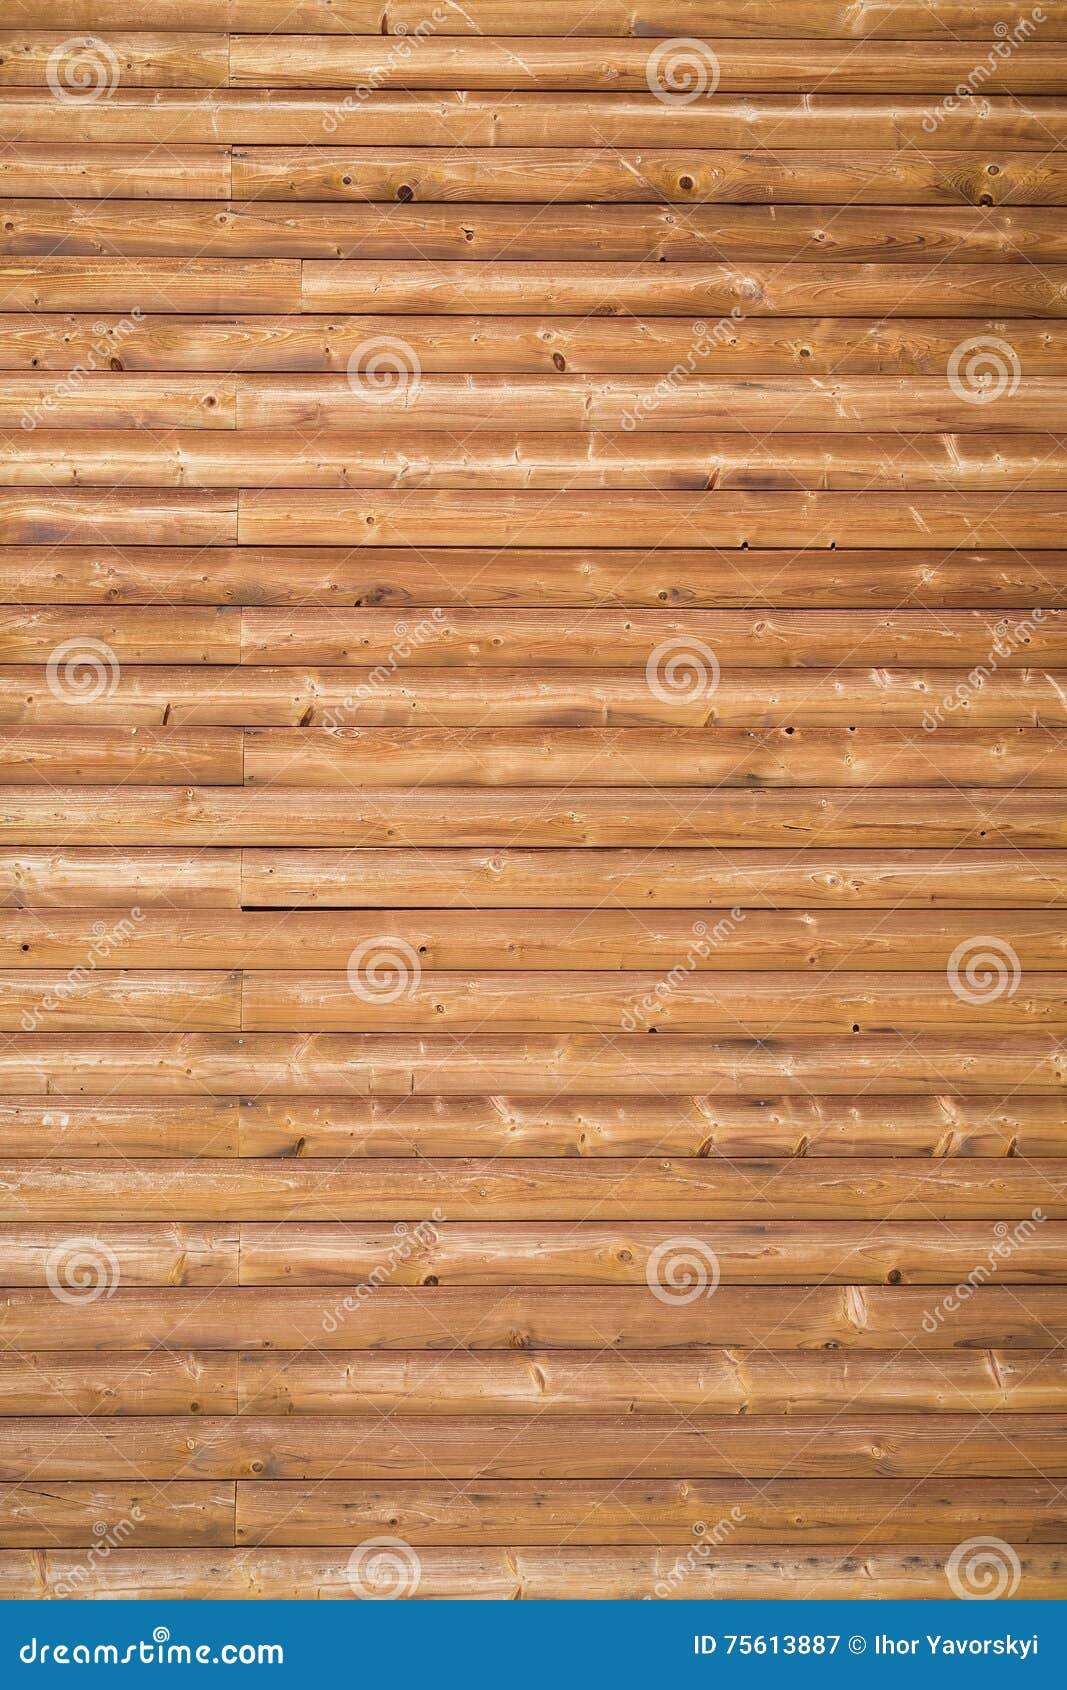 Texture of wooden surface - can be used as background. Texture of wooden surface bacground forest